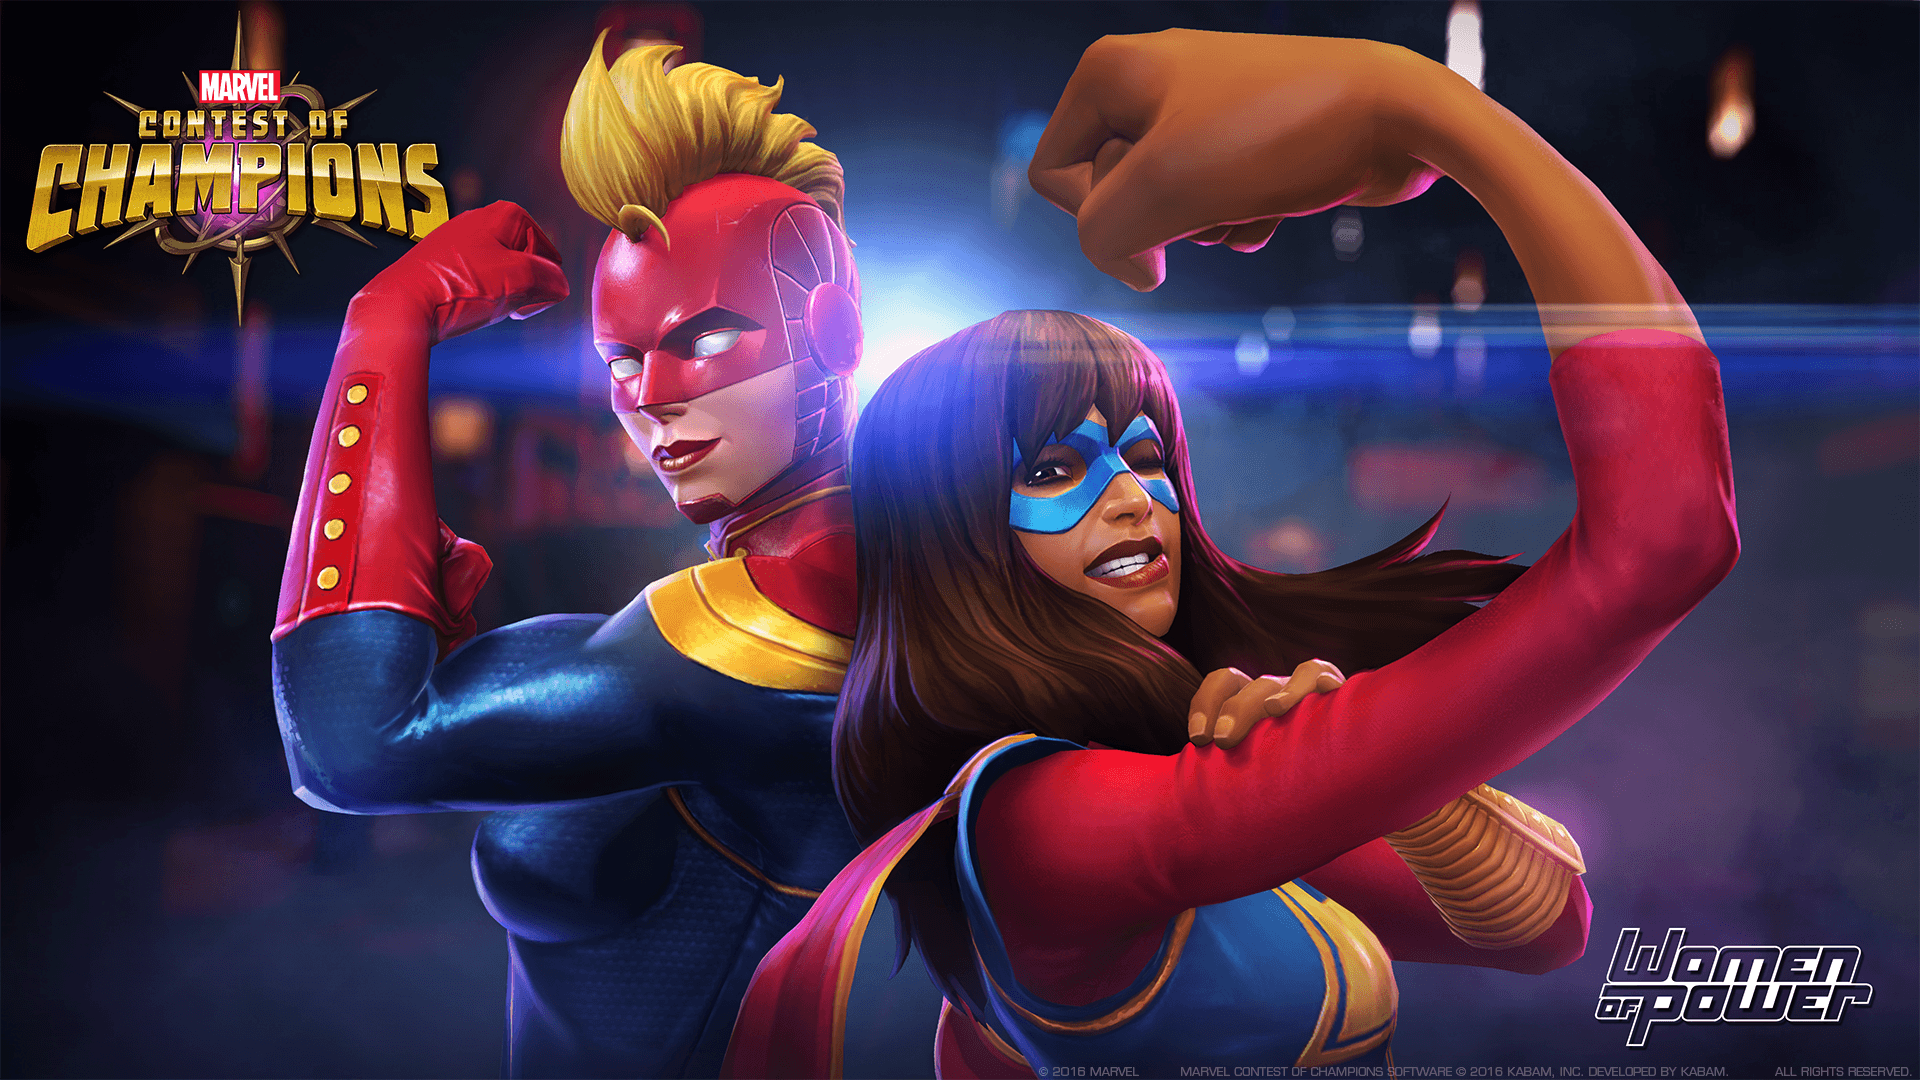 MARVEL Contest of Champions HD Wallpaper. Background Image